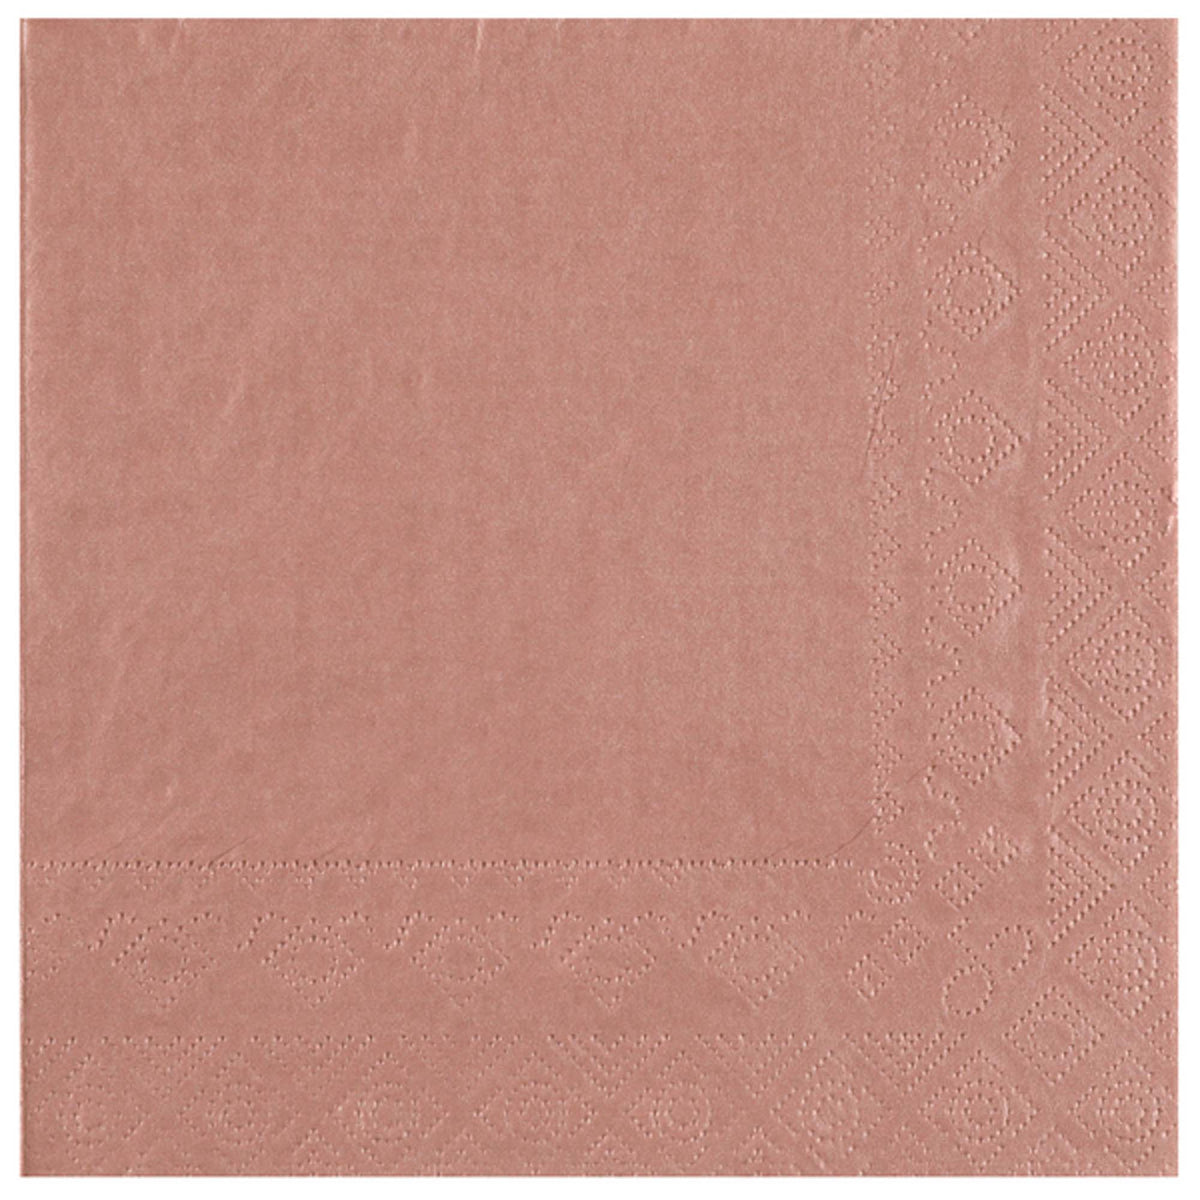 SANTEX Everyday Entertaining Rose Gold Large Lunch Napkins, 25 Count 3660380090144